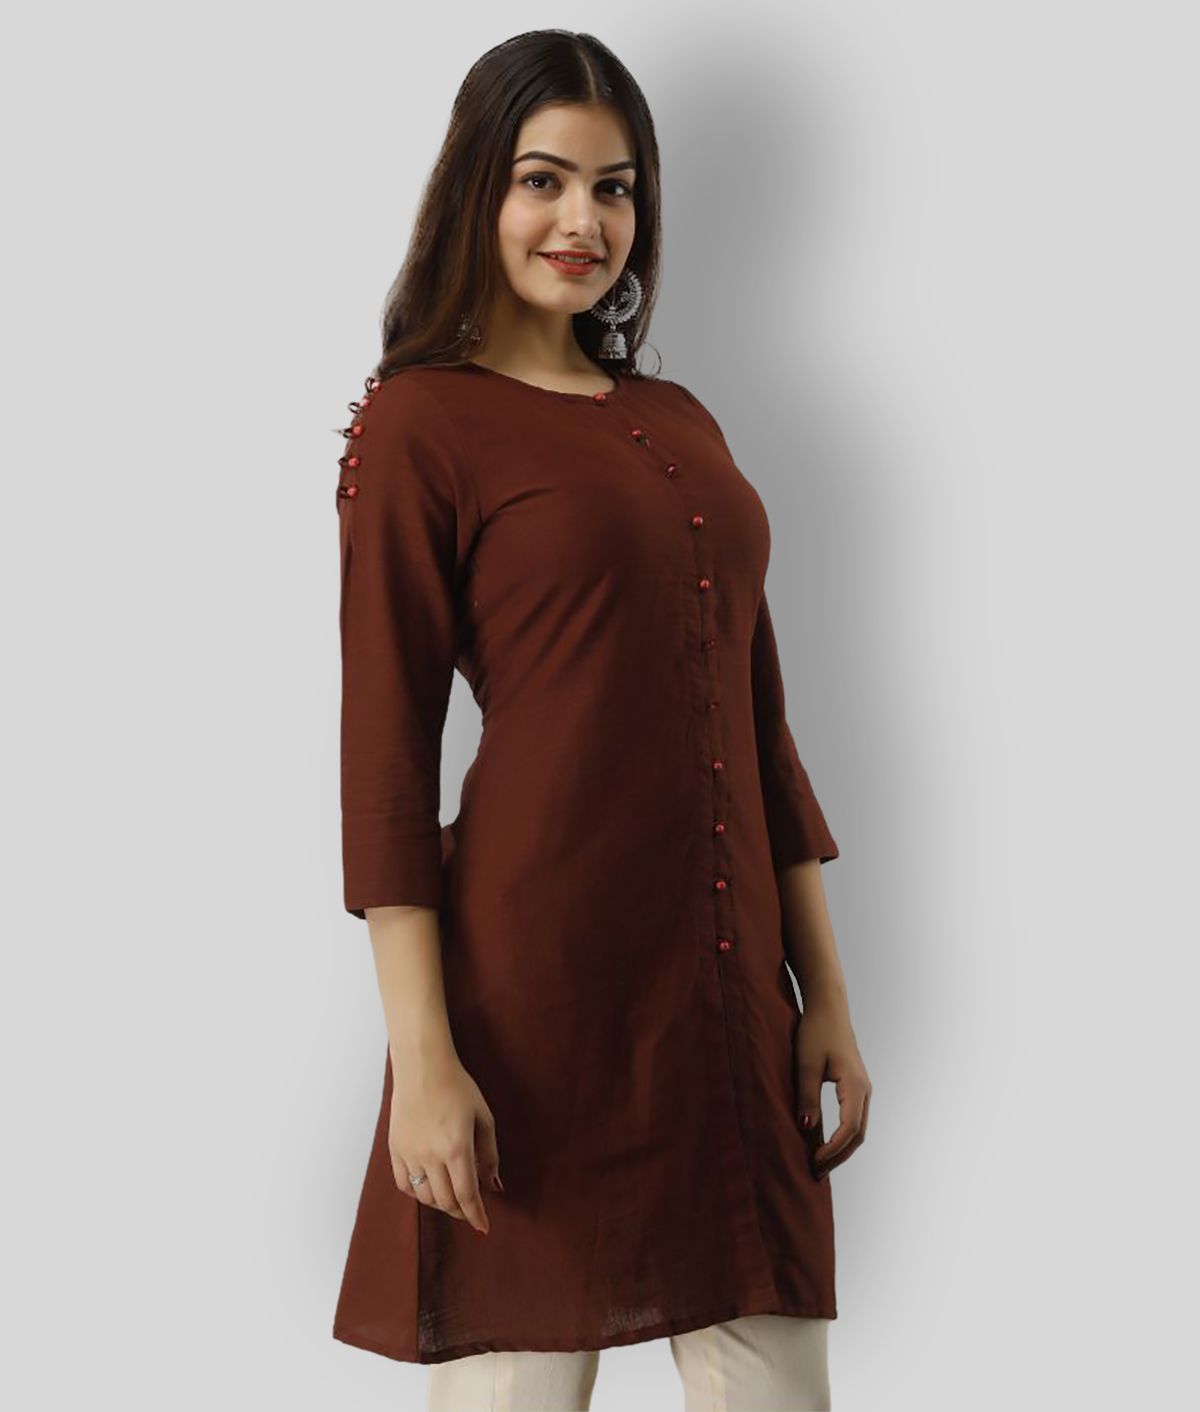     			SVARCHI - Brown Cotton Women's Tunic ( Pack of 1 )